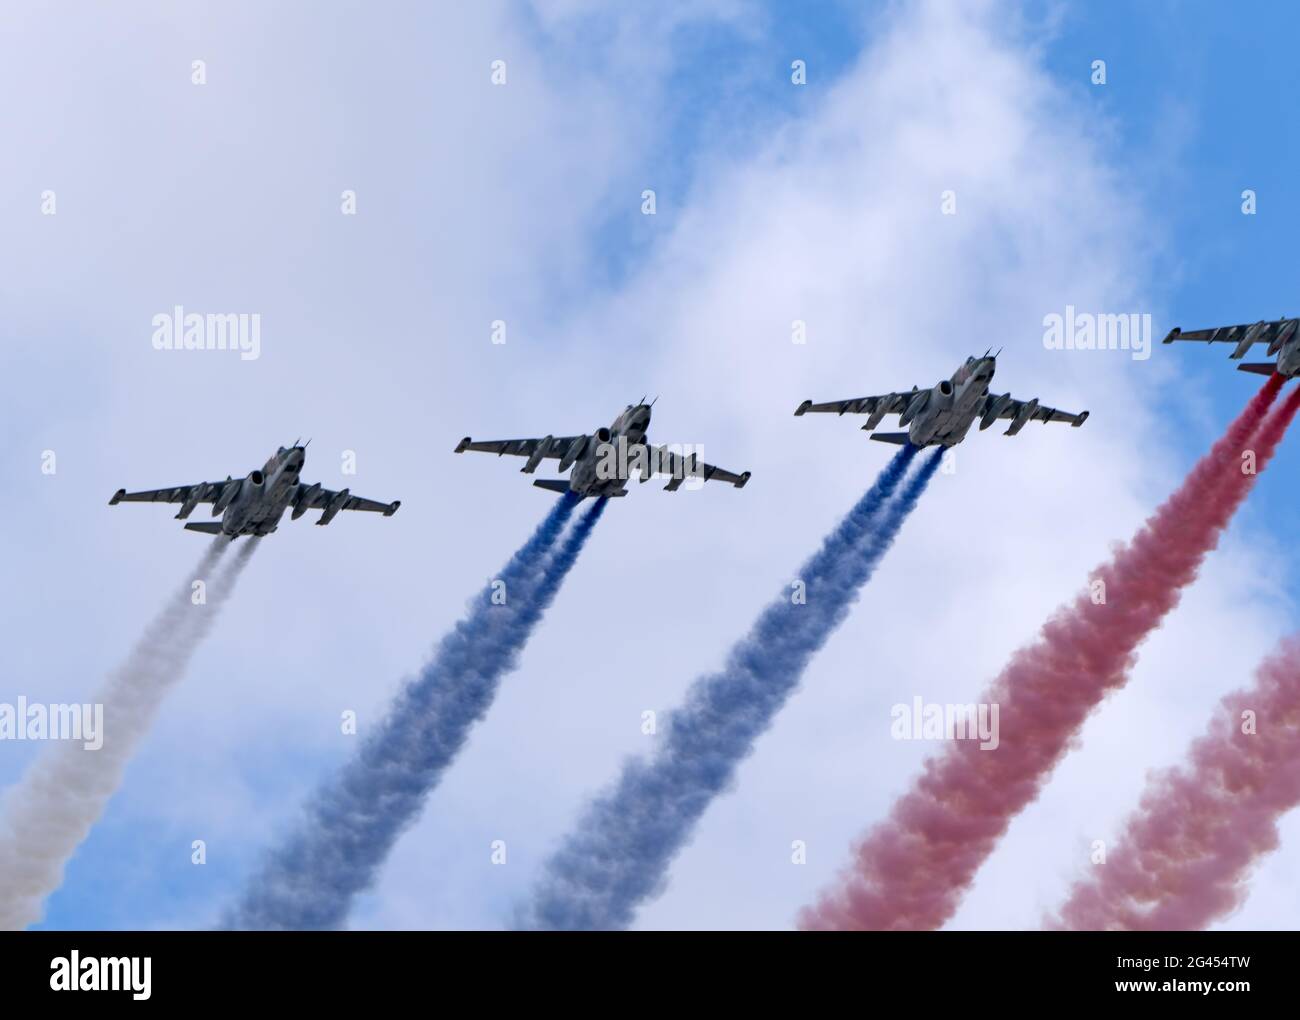 MOSCOW, RUSSIA - MAY 7, 2021: Avia parade in Moscow. Group of Russian fighters Sukhoi Su-25 with painted russian flag in the sky Stock Photo